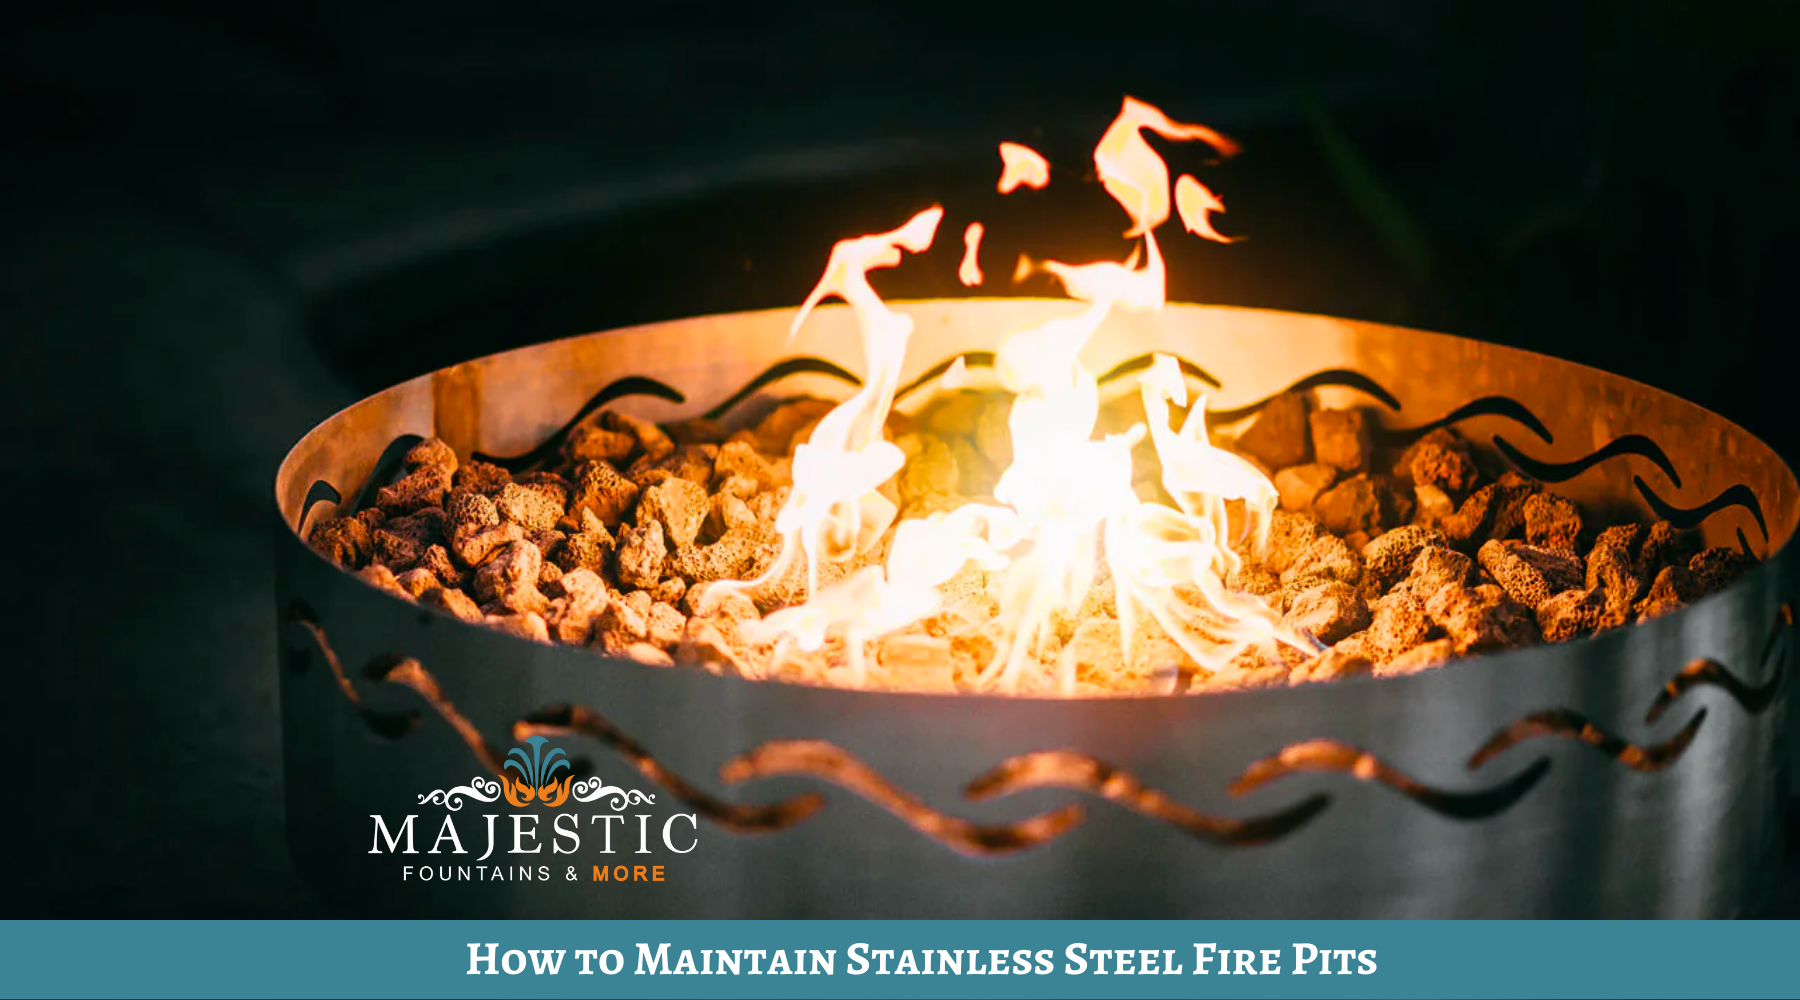 How to Maintain Stainless Steel Fire Pits